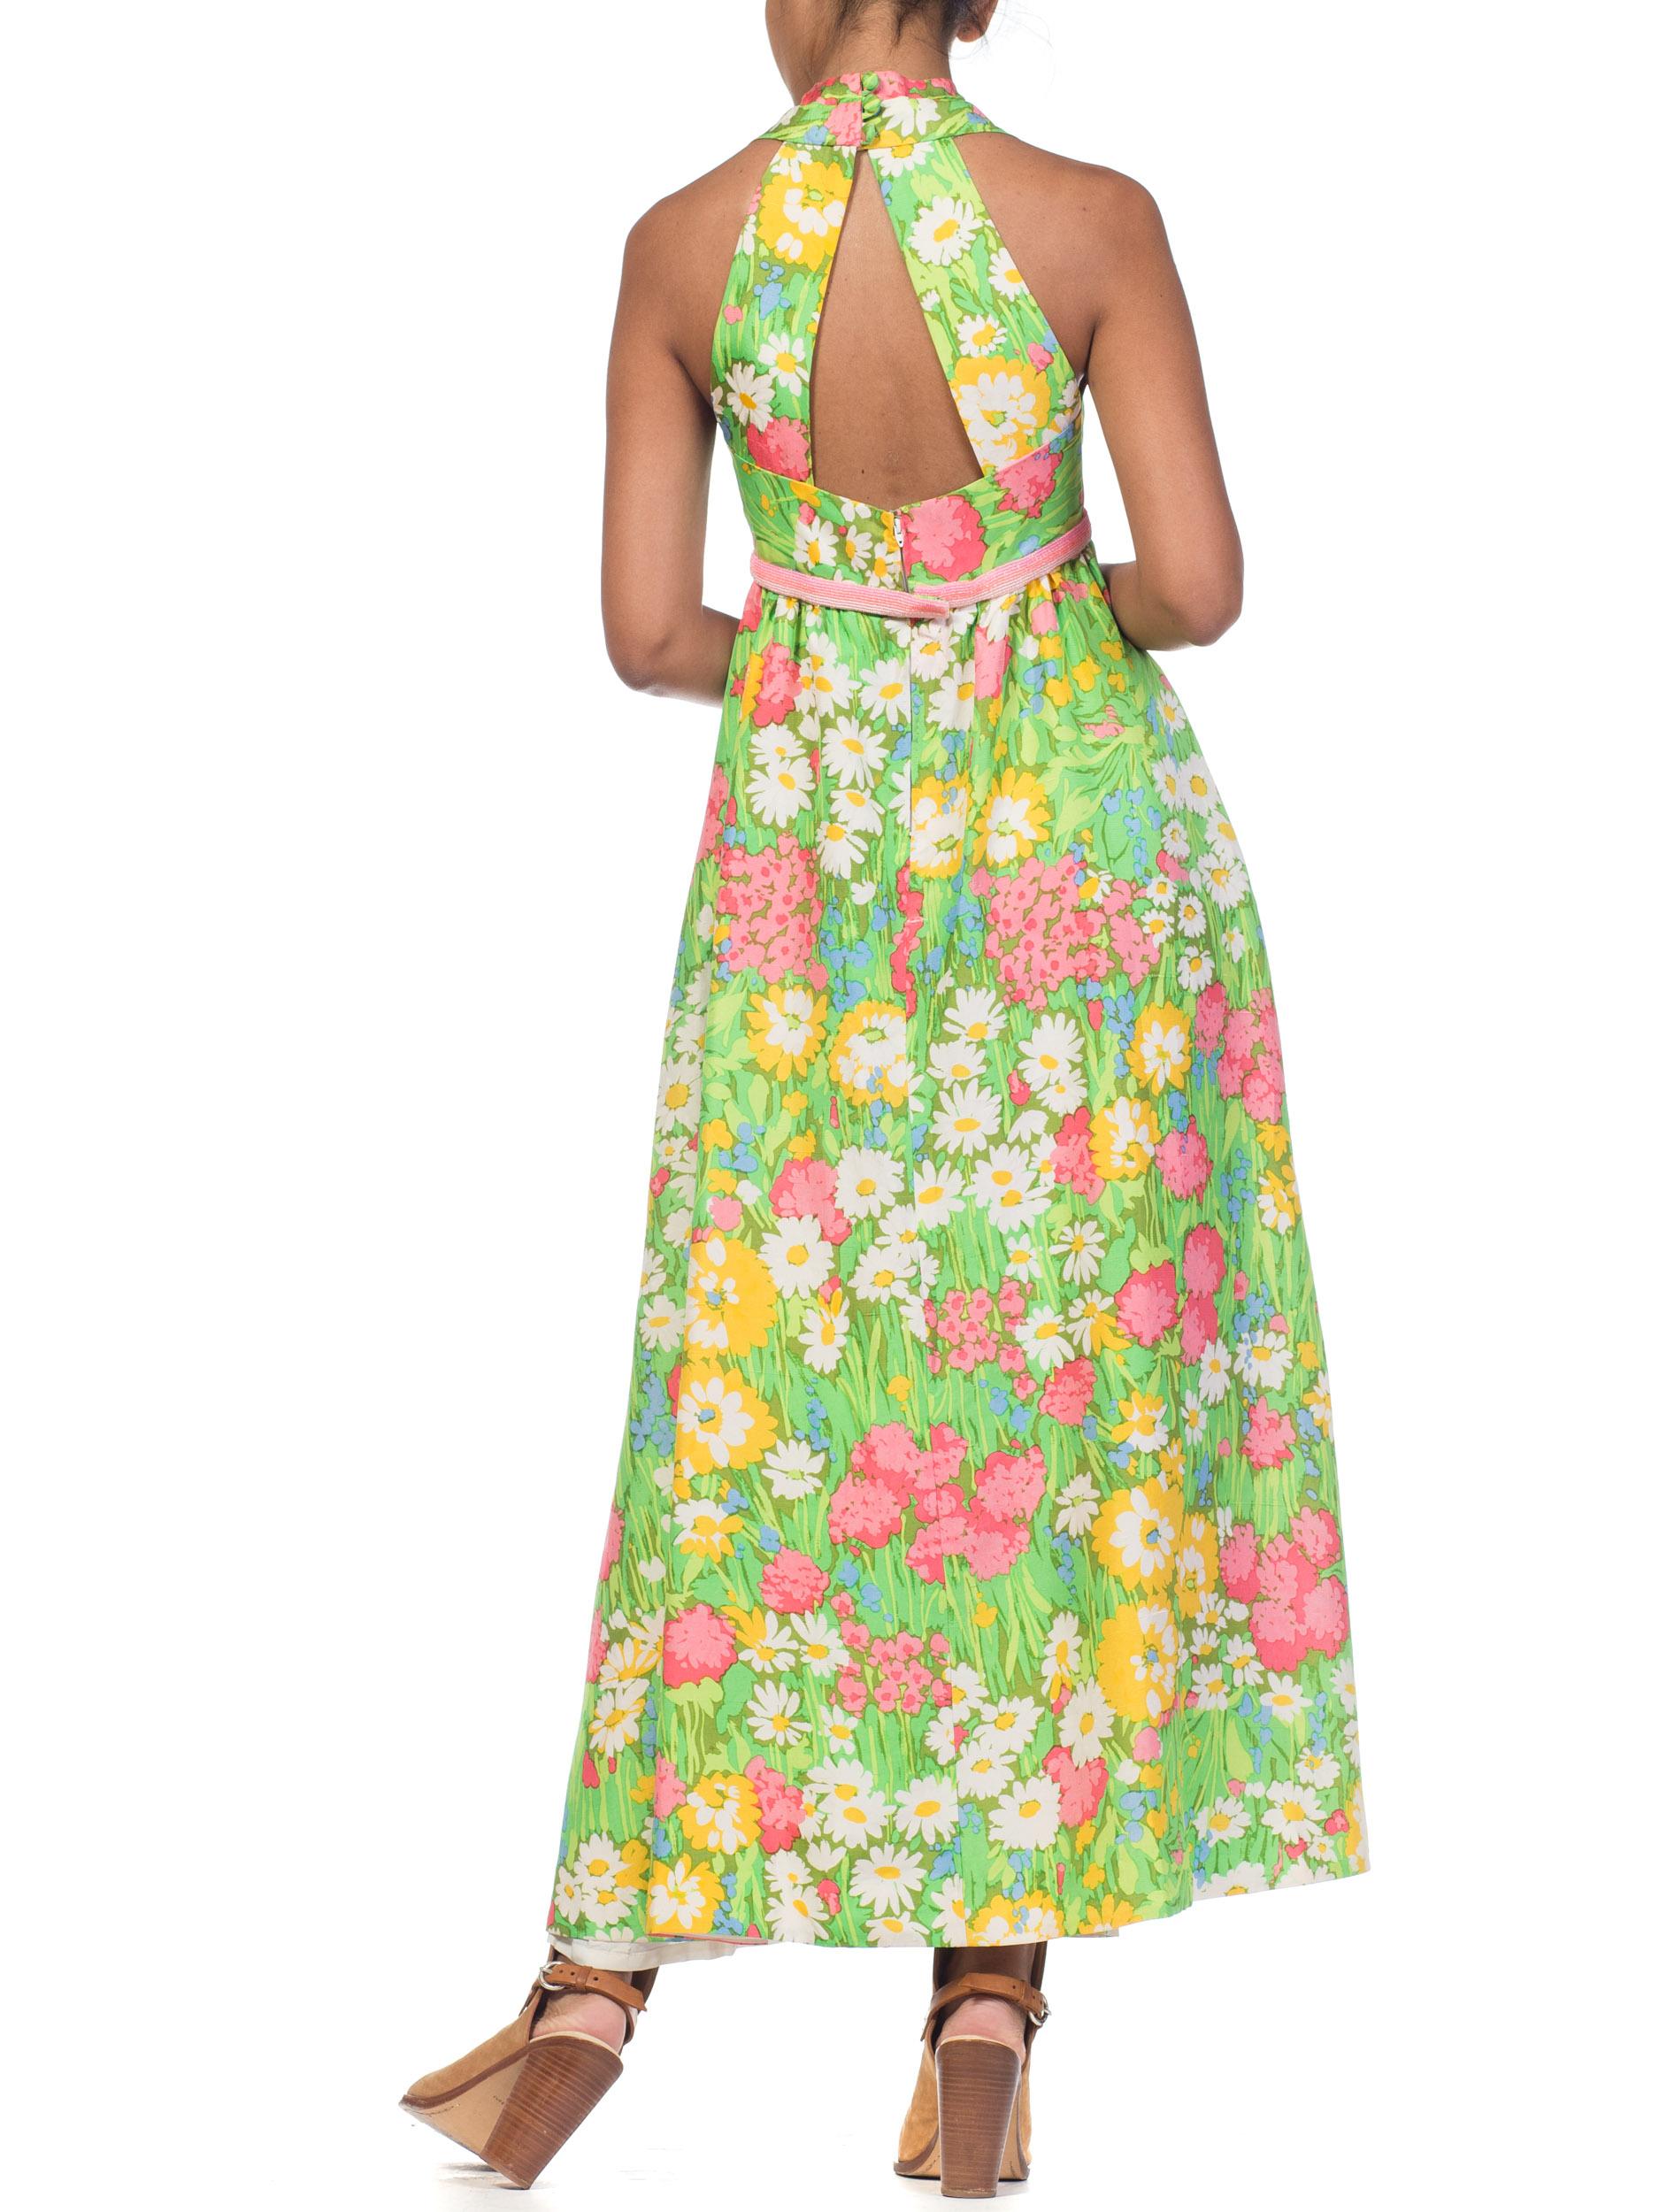 1960s 1970s Floral Printed Silk Halter Dress with Beading 8